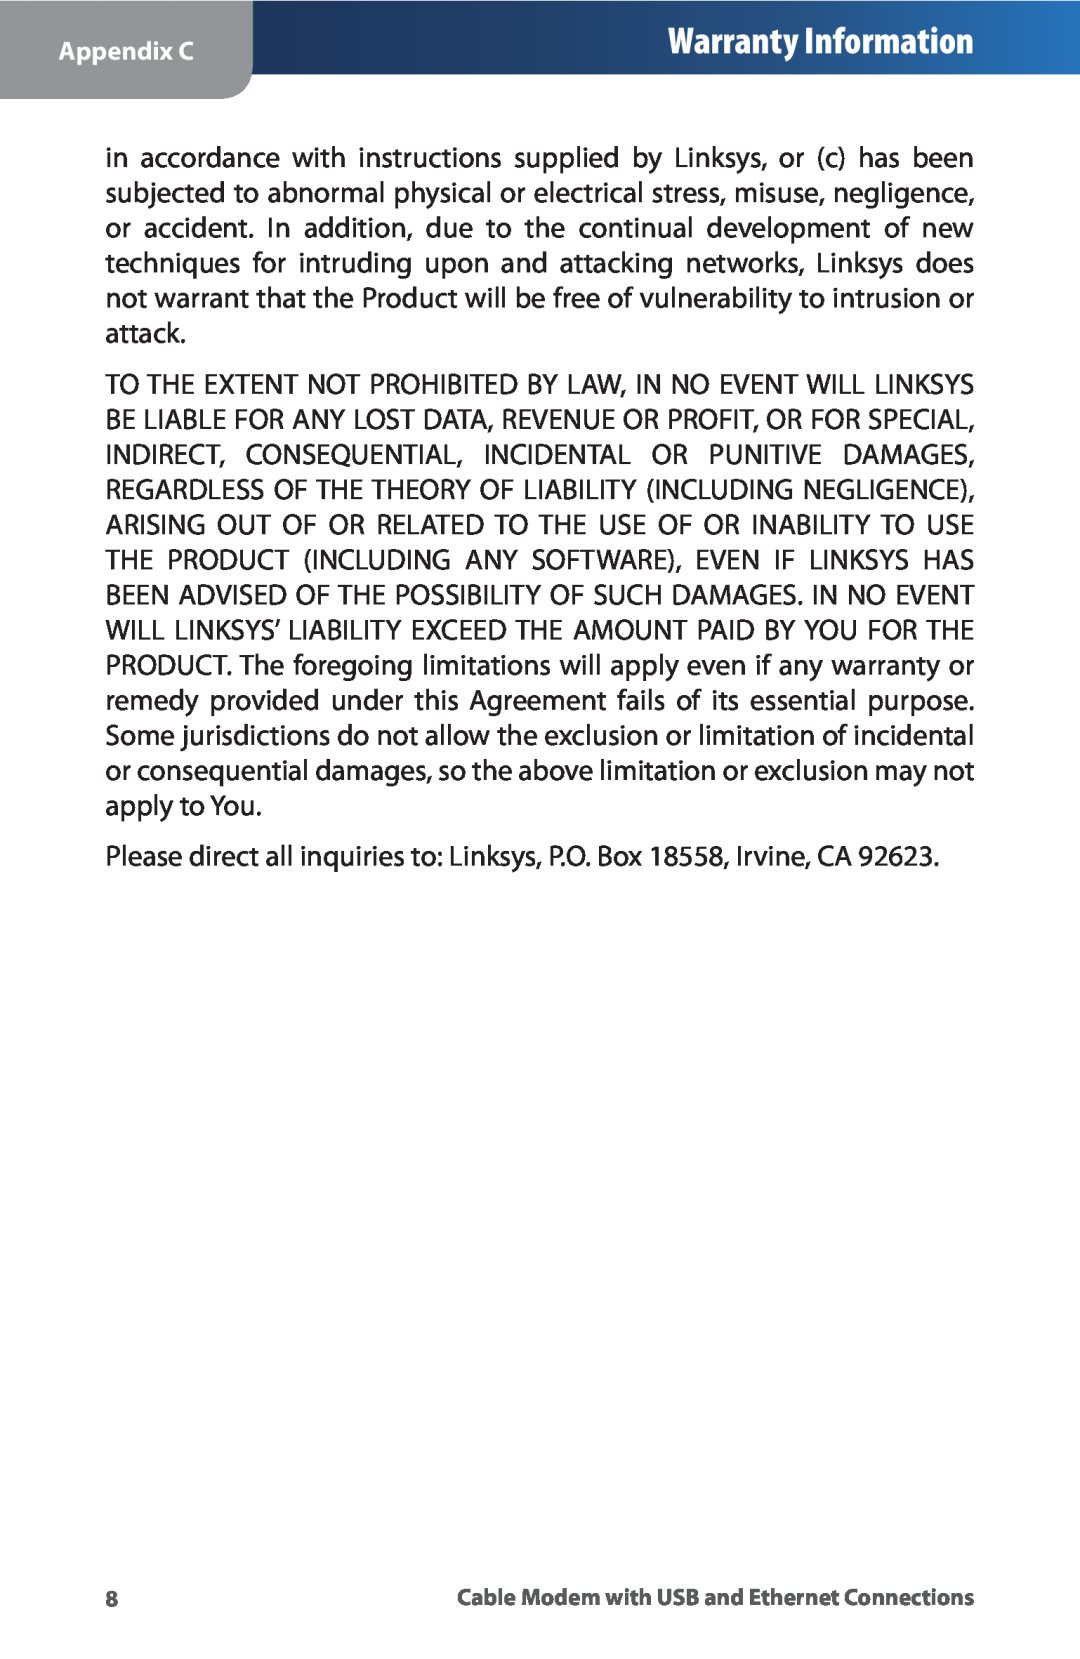 Linksys CM100 manual Warranty Information, Please direct all inquiries to Linksys, P.O. Box 18558, Irvine, CA 